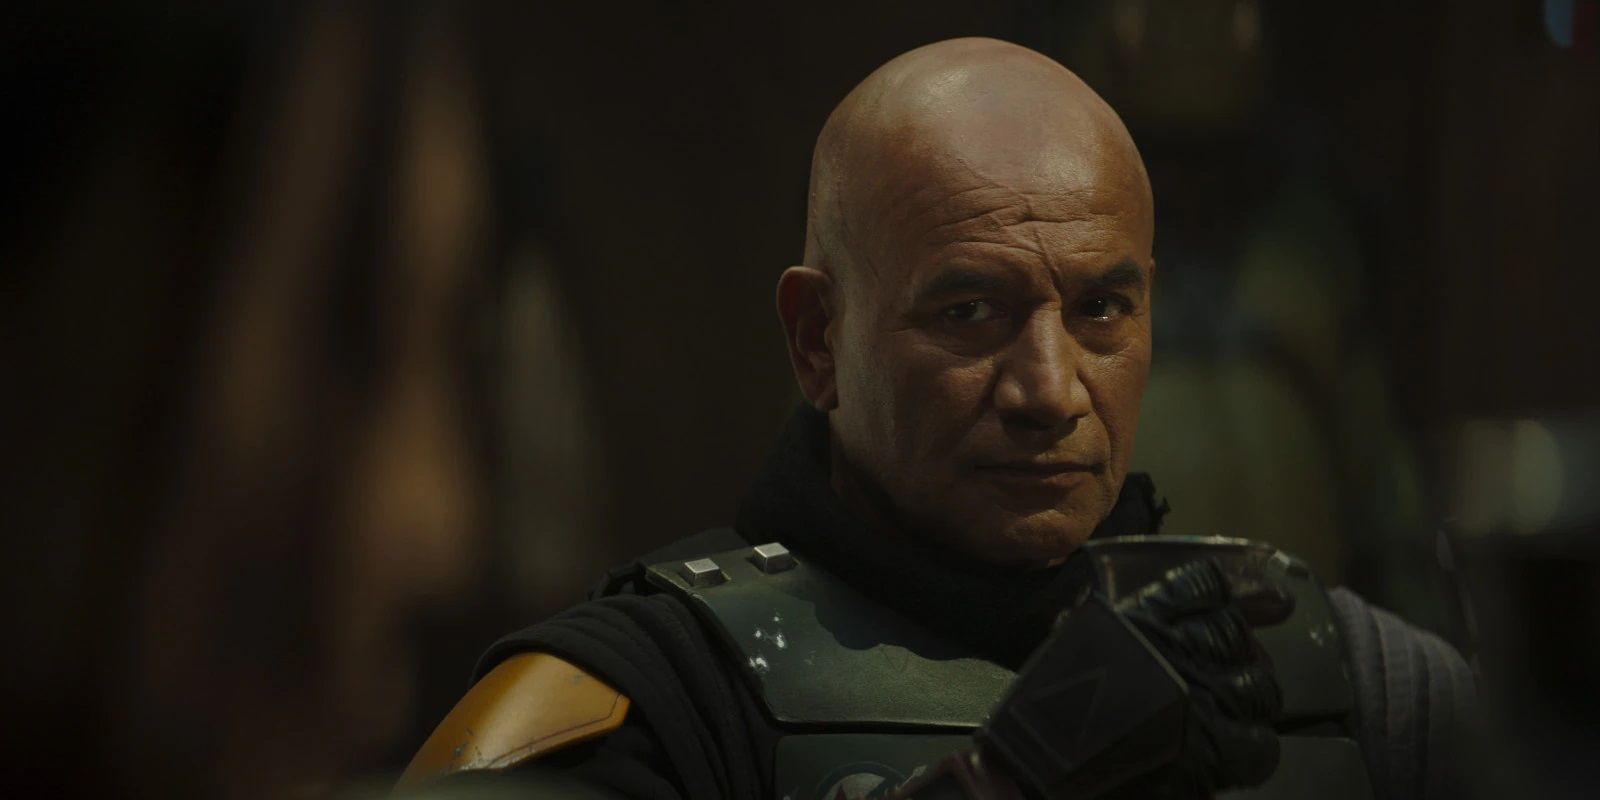 Temuera Morrison in the trailer for The Book of Boba Fett